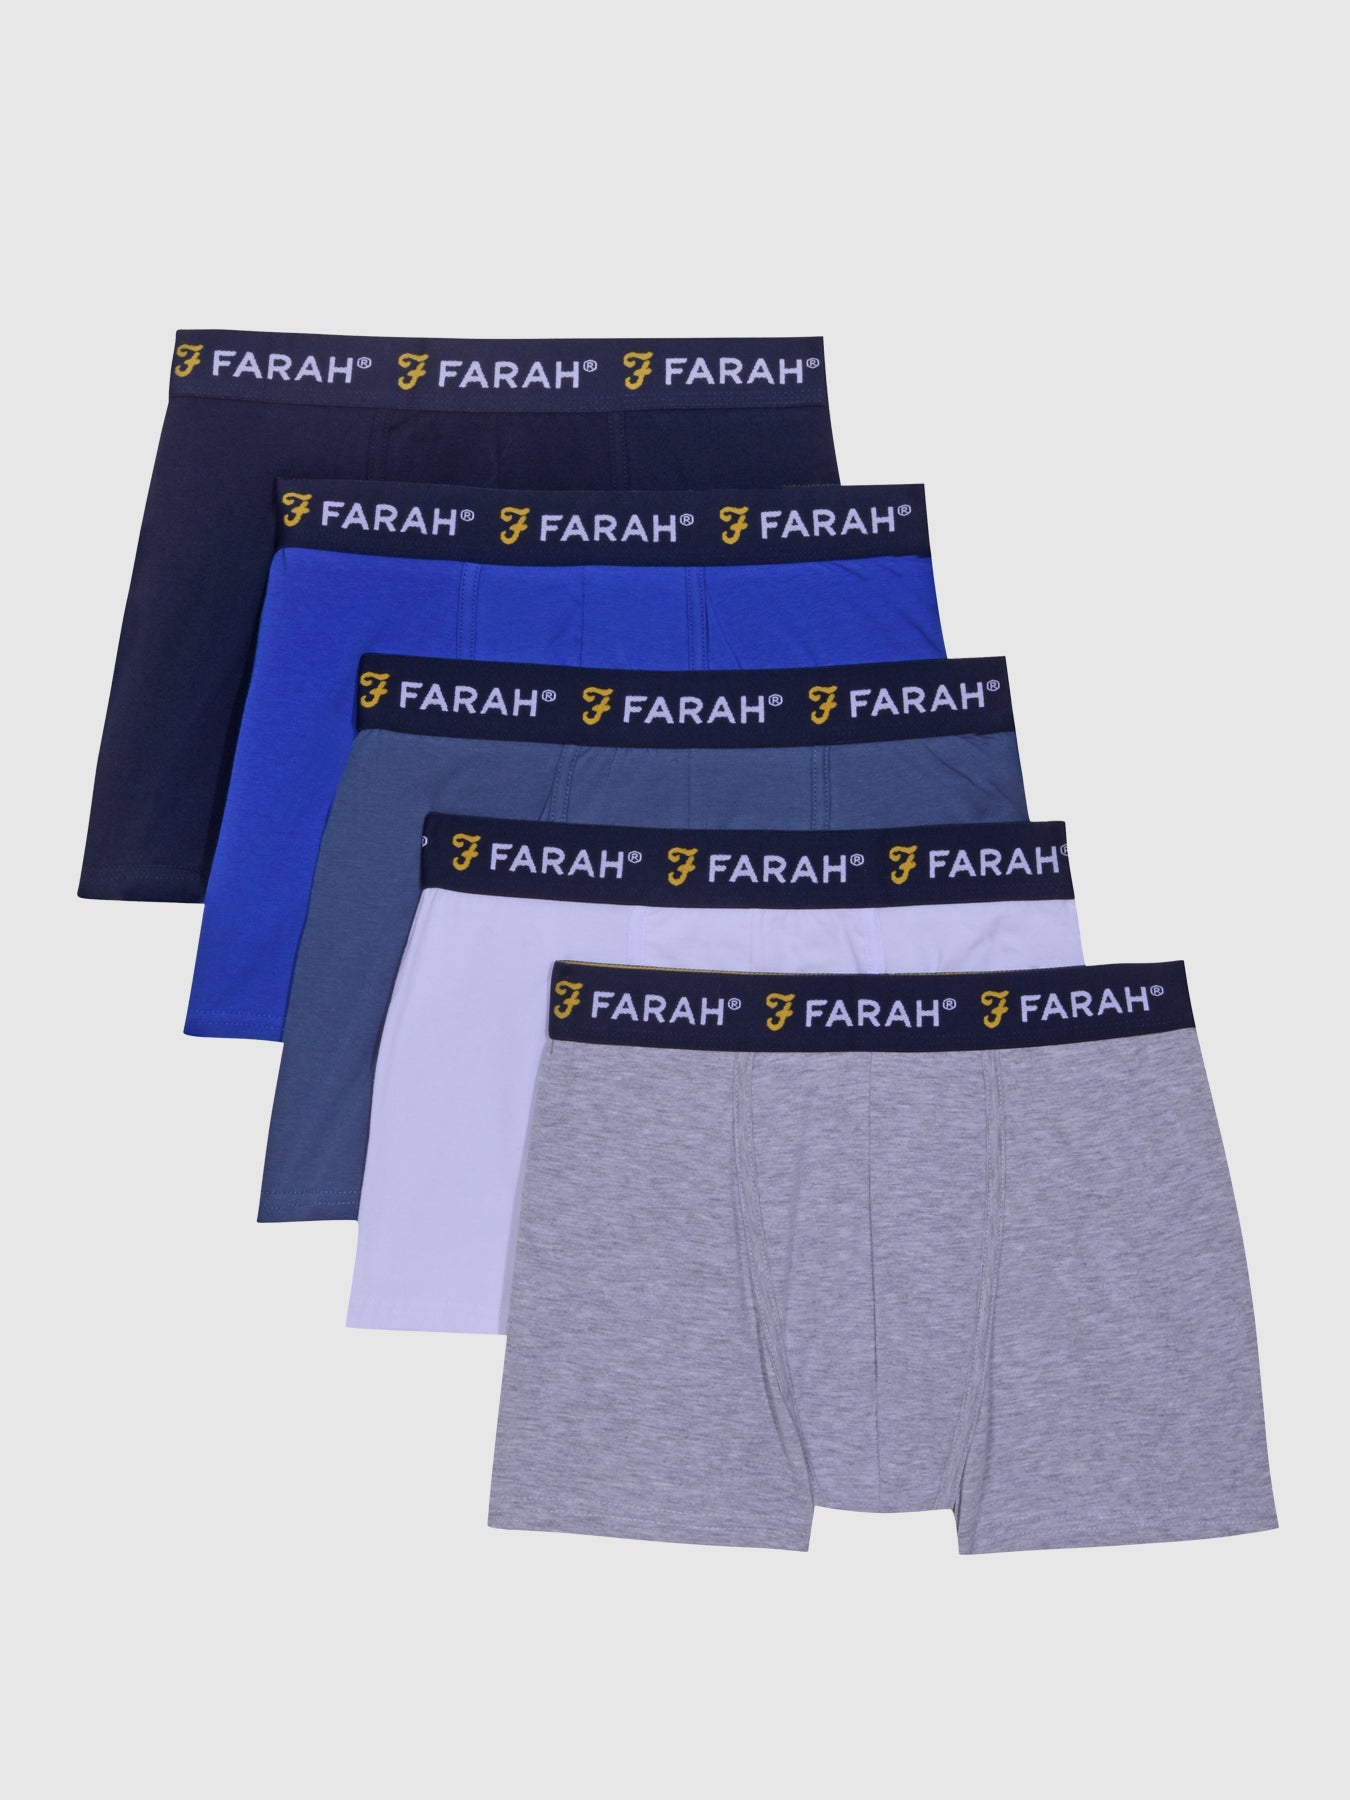 View 5 Pack Augustus Boxers In Blues information